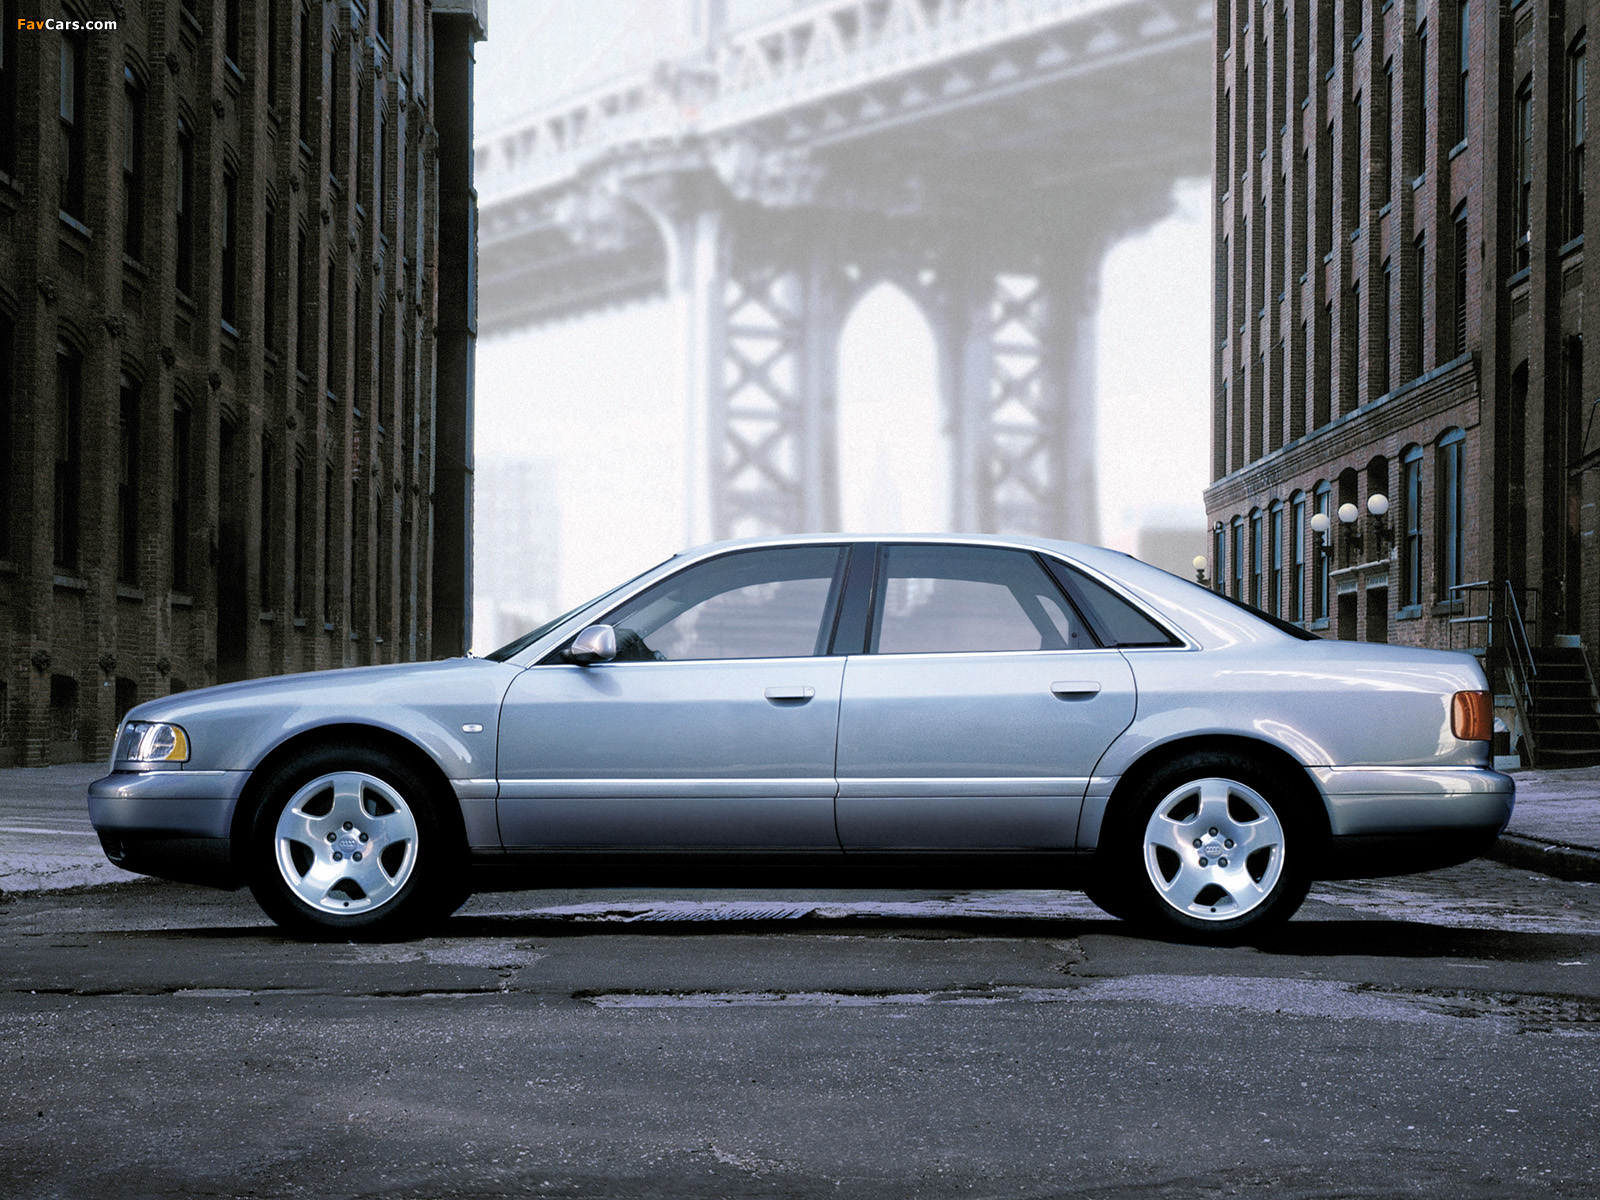 Image Of Audi A8 D2 For Your